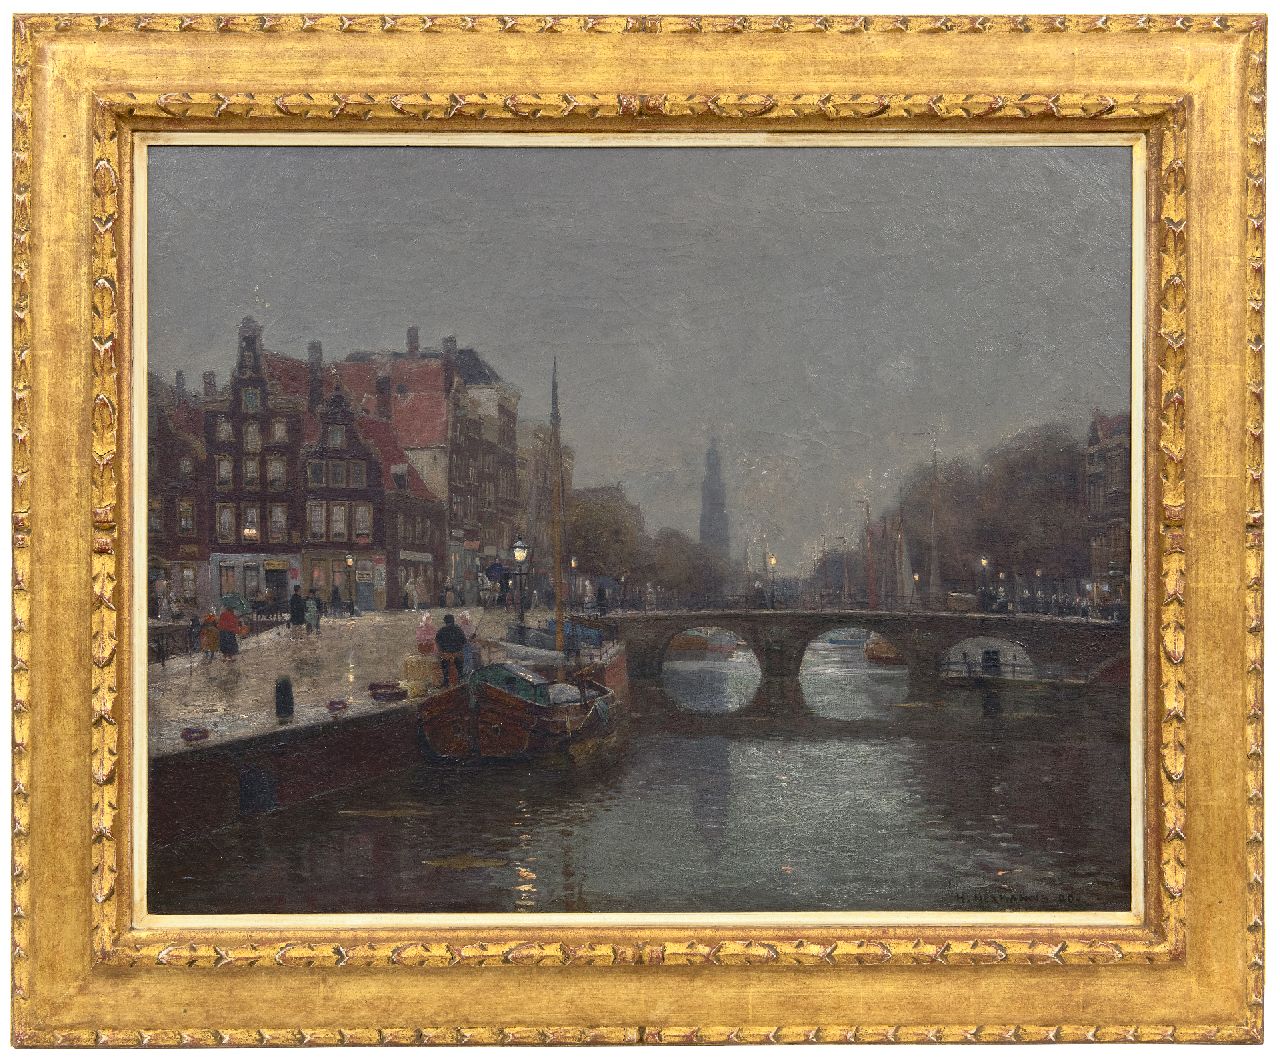 Hermanns H.  | Heinrich Hermanns, The Prinsengracht in Amsterdam on a rainy day, oil on canvas 55.8 x 70.7 cm, signed l.r. and dated '90